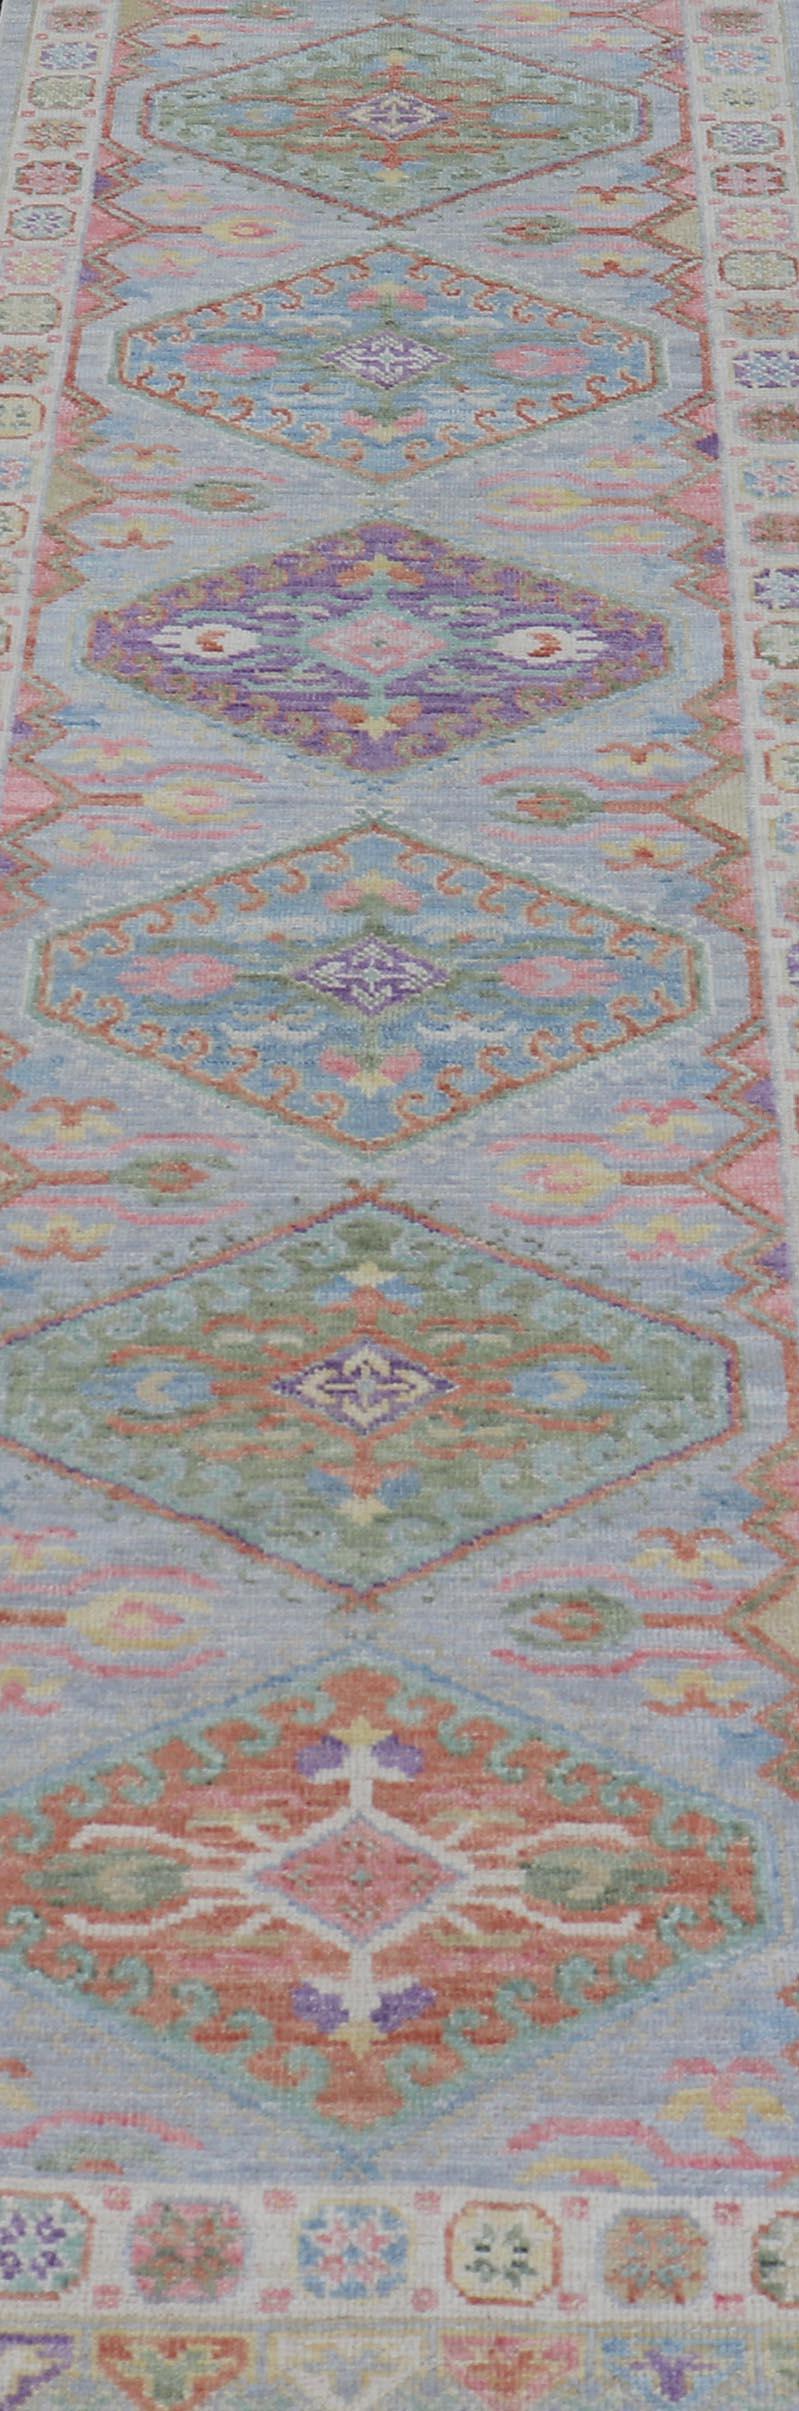 This charismatic runner features medallions on a double-lined border, and larger diamond medallions in the field. Each medallion boasting the craftsmanship of every detail, and displaying colors such as grassy greens, oranges, blues, violet, red and